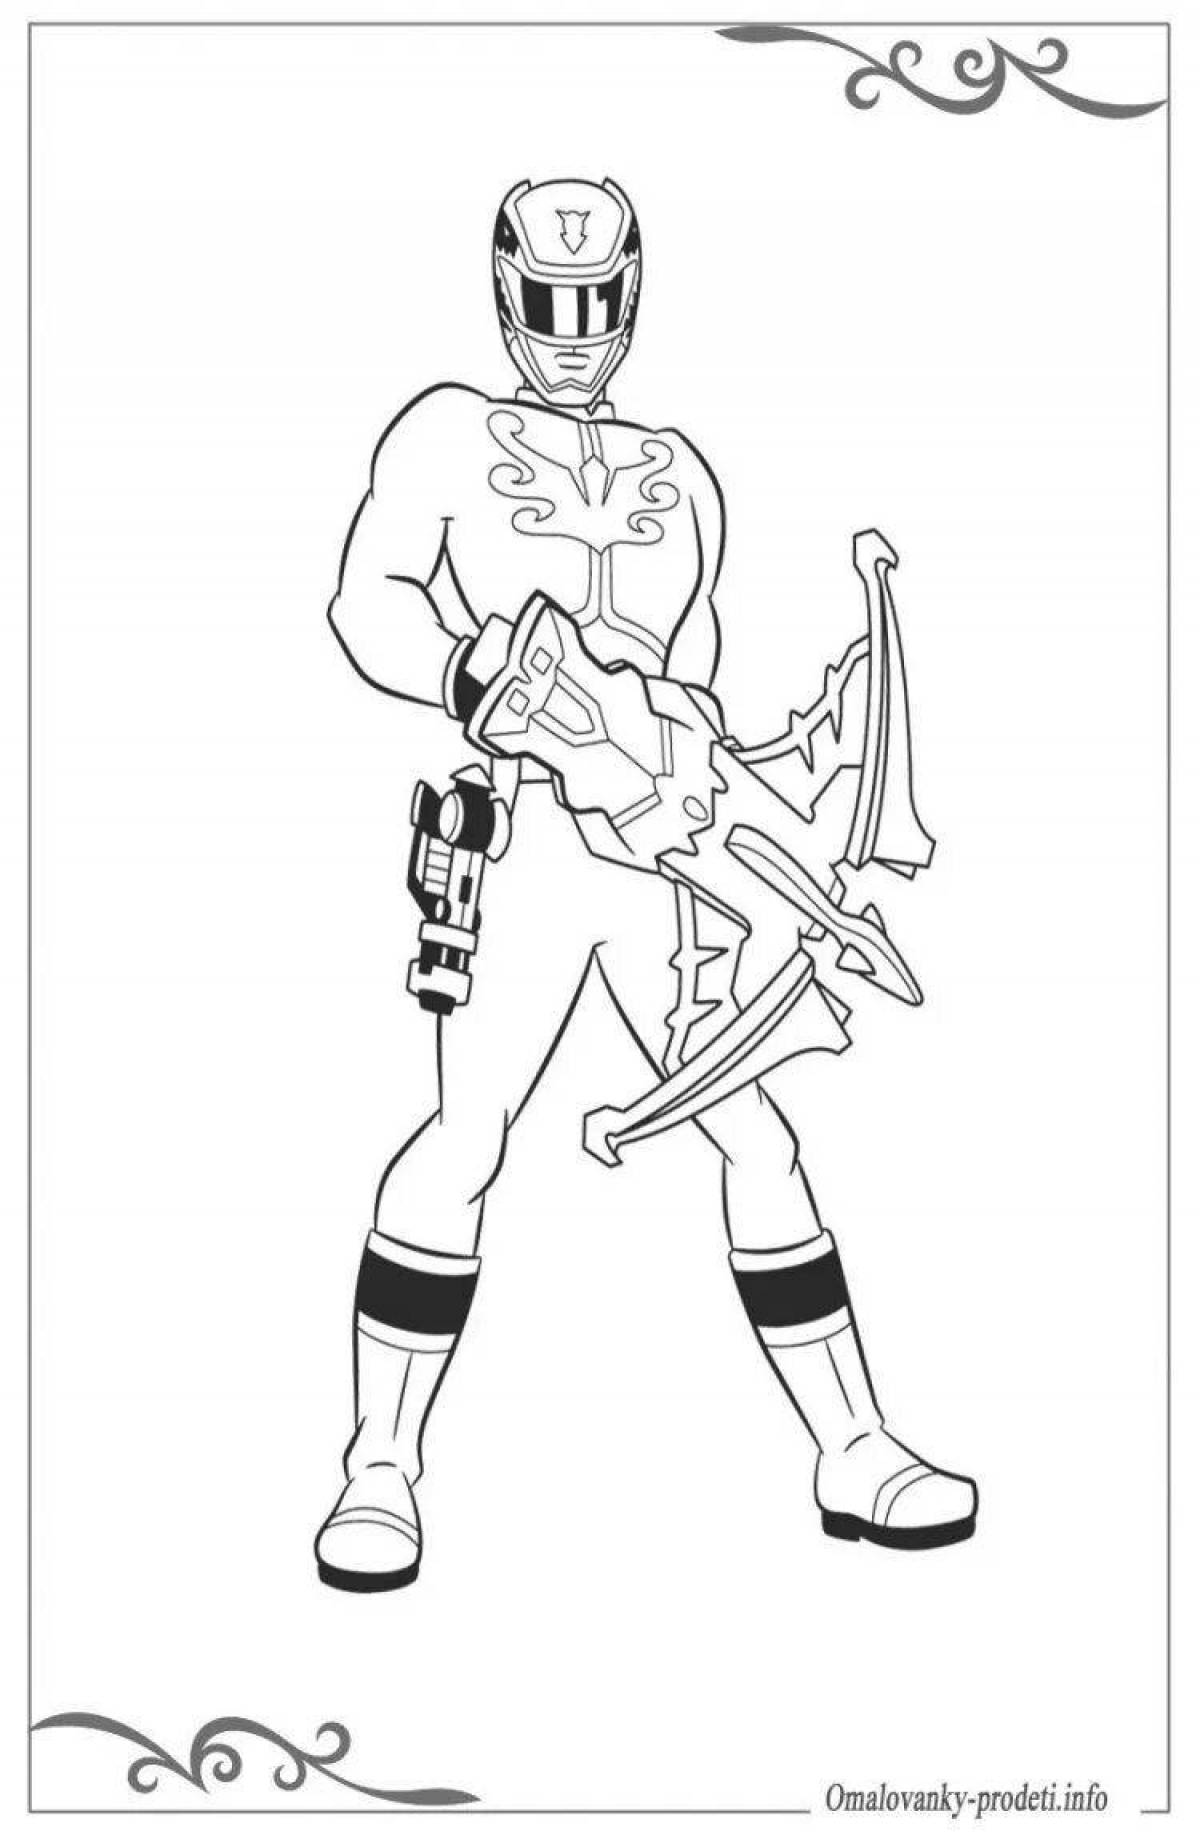 Charming roger ranger coloring page